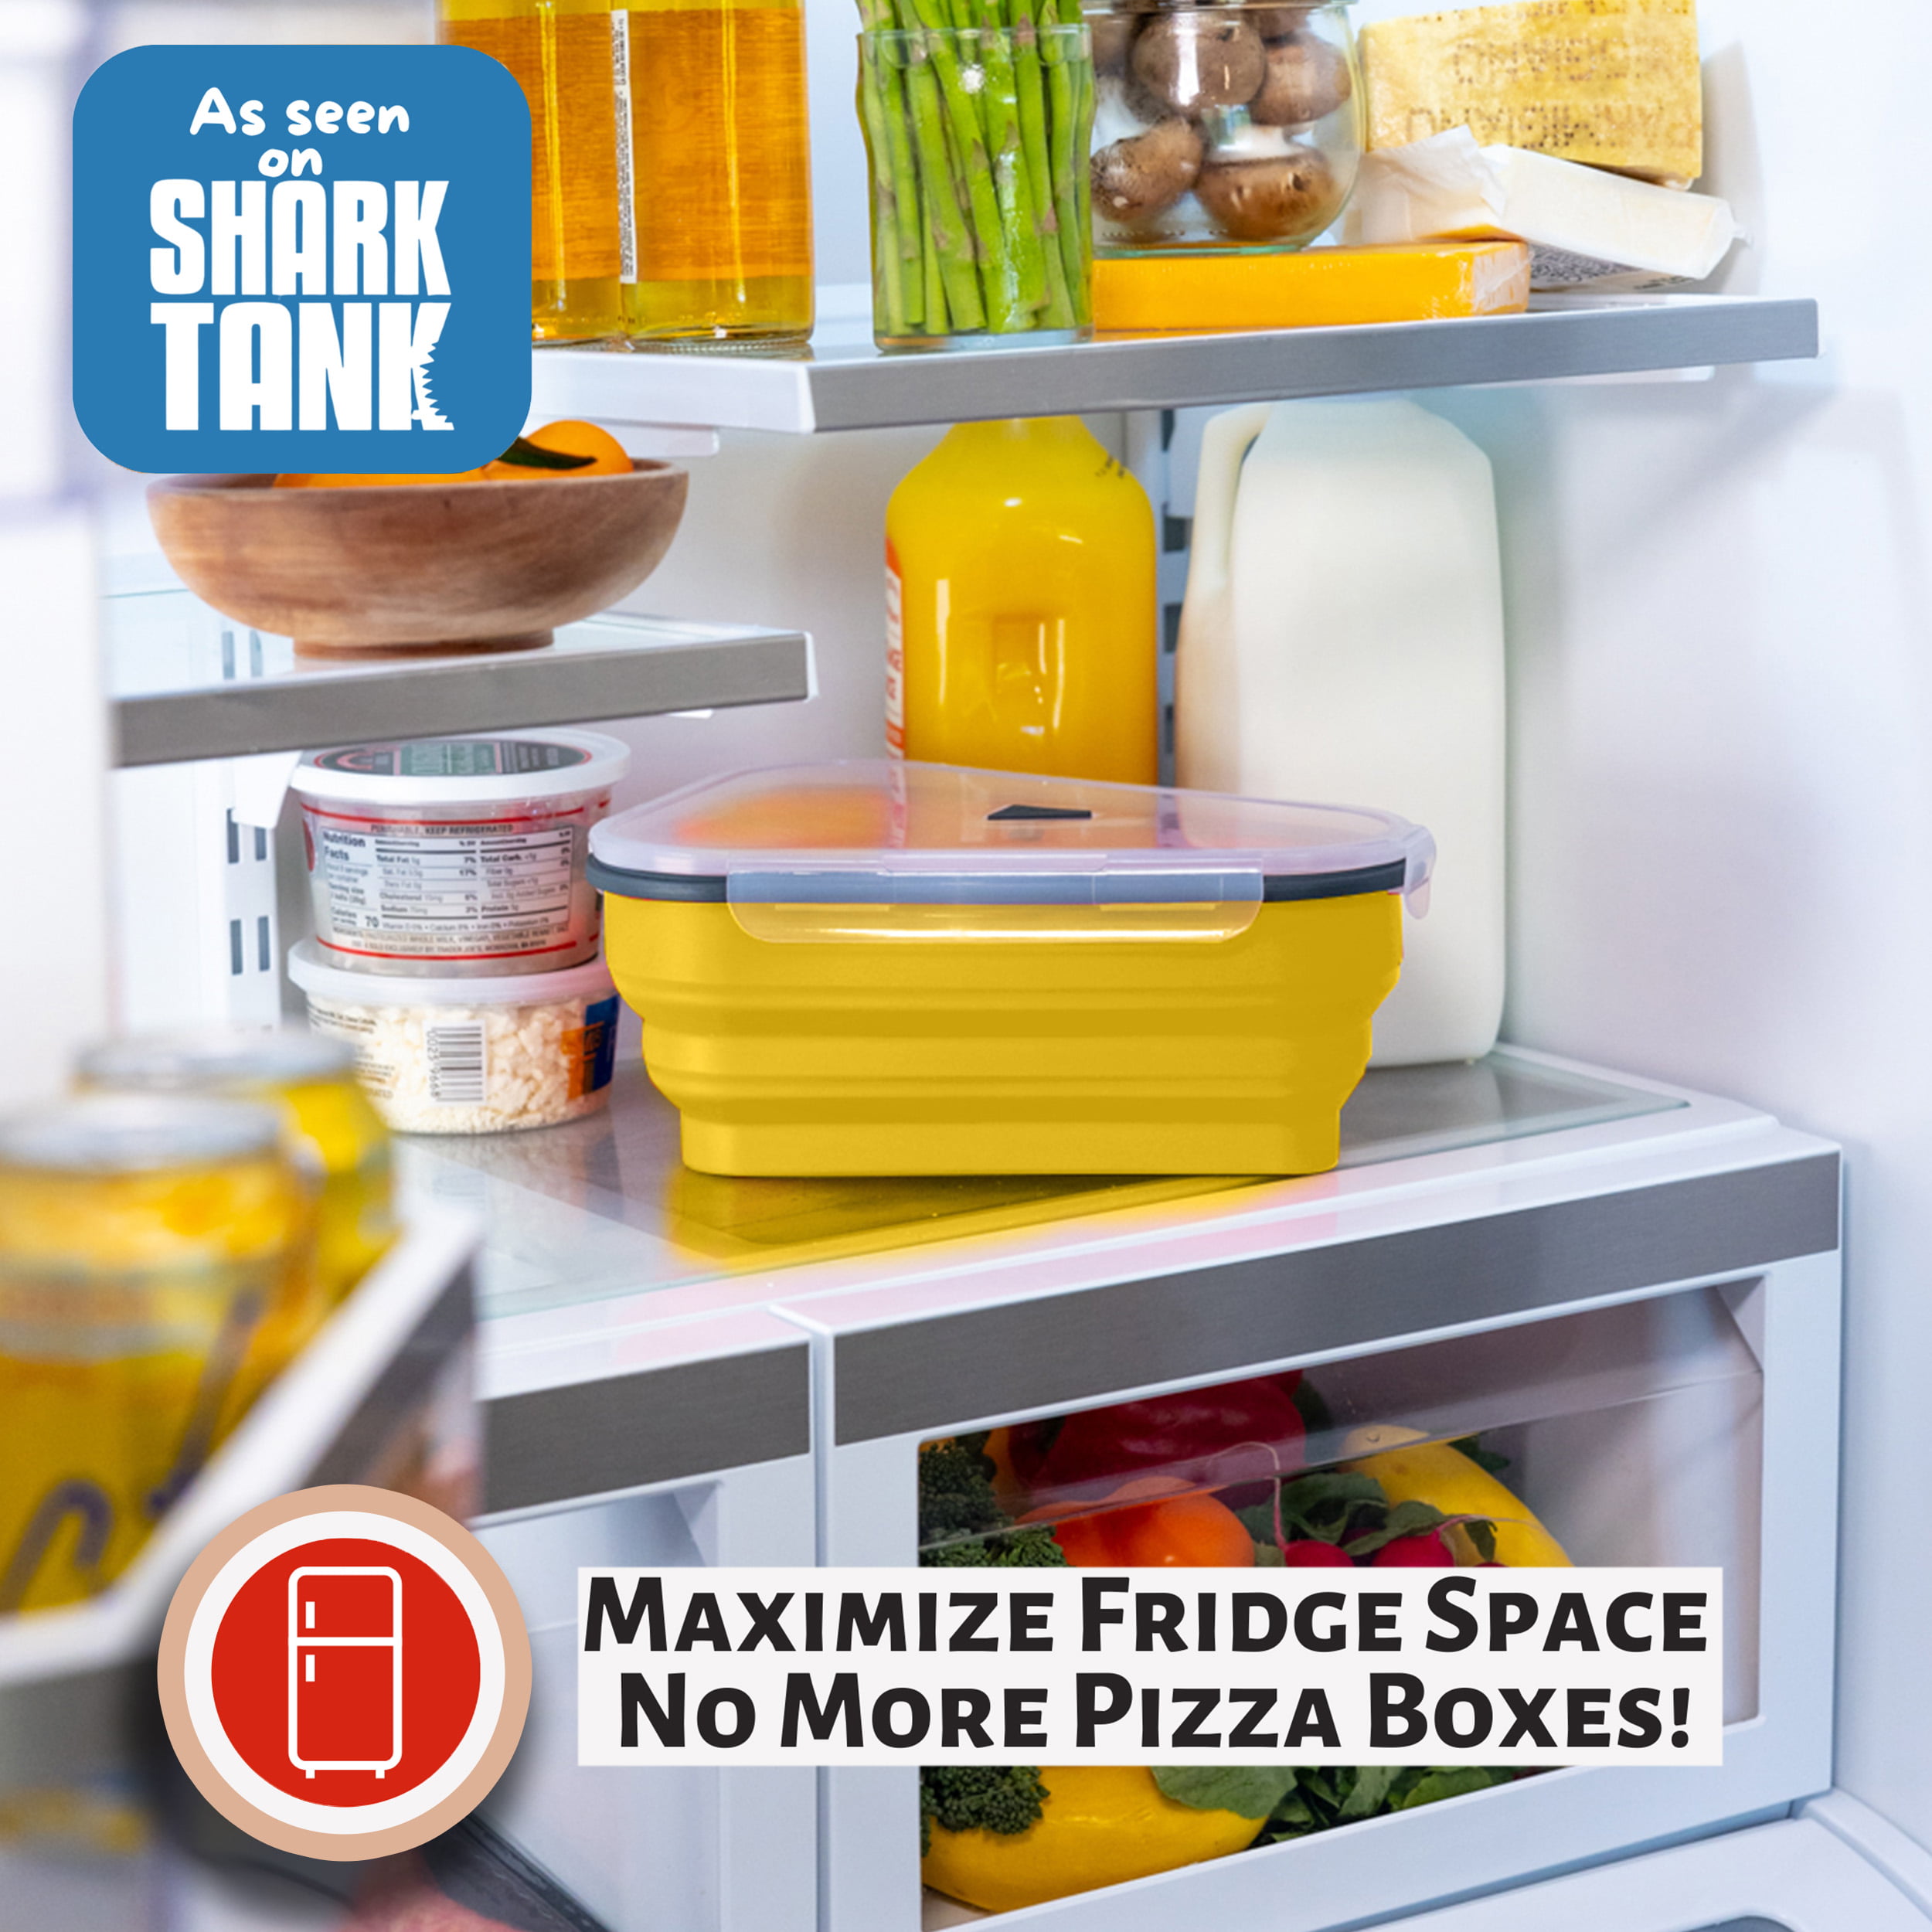 Dropship Reusable Pizza Storage Container With Microwavable Serving Trays -  Adjustable Pizza Slice Container To Organize & Save Space - BPA Free,  Microwave, & Dishwasher Safe to Sell Online at a Lower